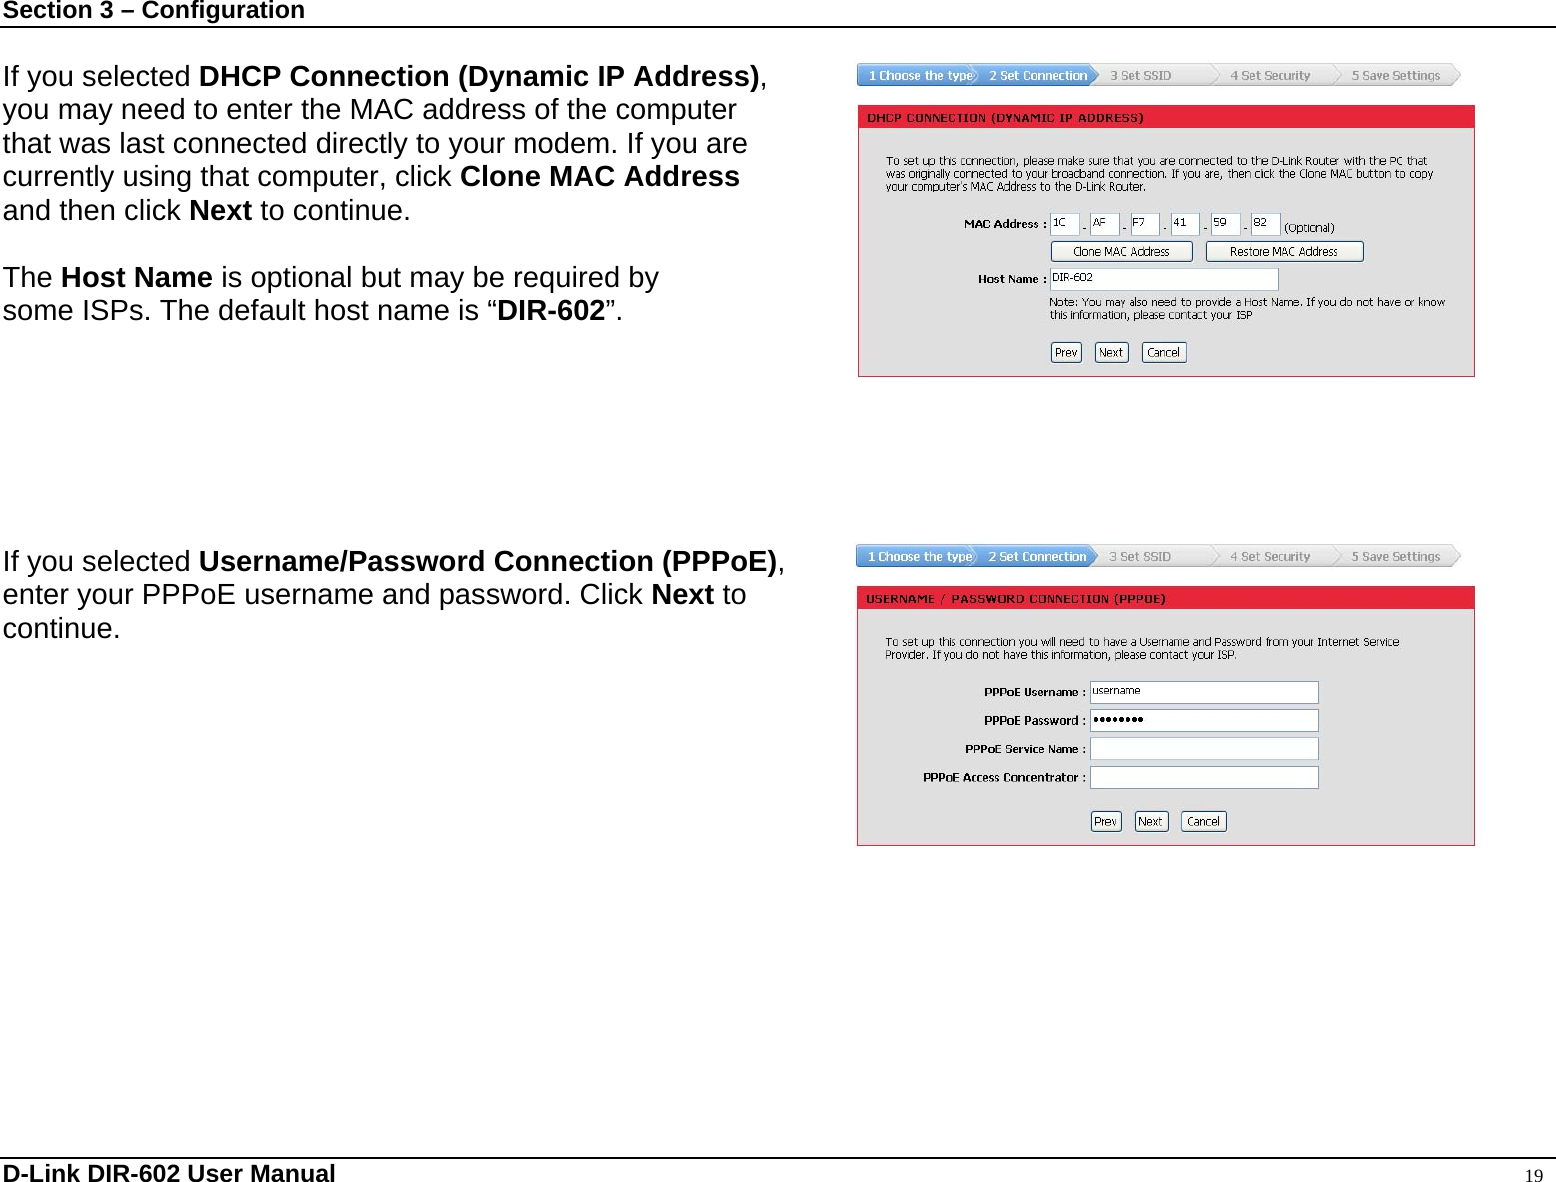 Section 3 – Configuration  If you selected DHCP Connection (Dynamic IP Address),  you may need to enter the MAC address of the computer   that was last connected directly to your modem. If you are currently using that computer, click Clone MAC Address  and then click Next to continue.  The Host Name is optional but may be required by   some ISPs. The default host name is “DIR-602”.        If you selected Username/Password Connection (PPPoE),  enter your PPPoE username and password. Click Next to   continue.         D-Link DIR-602 User Manual                                                                                               19 